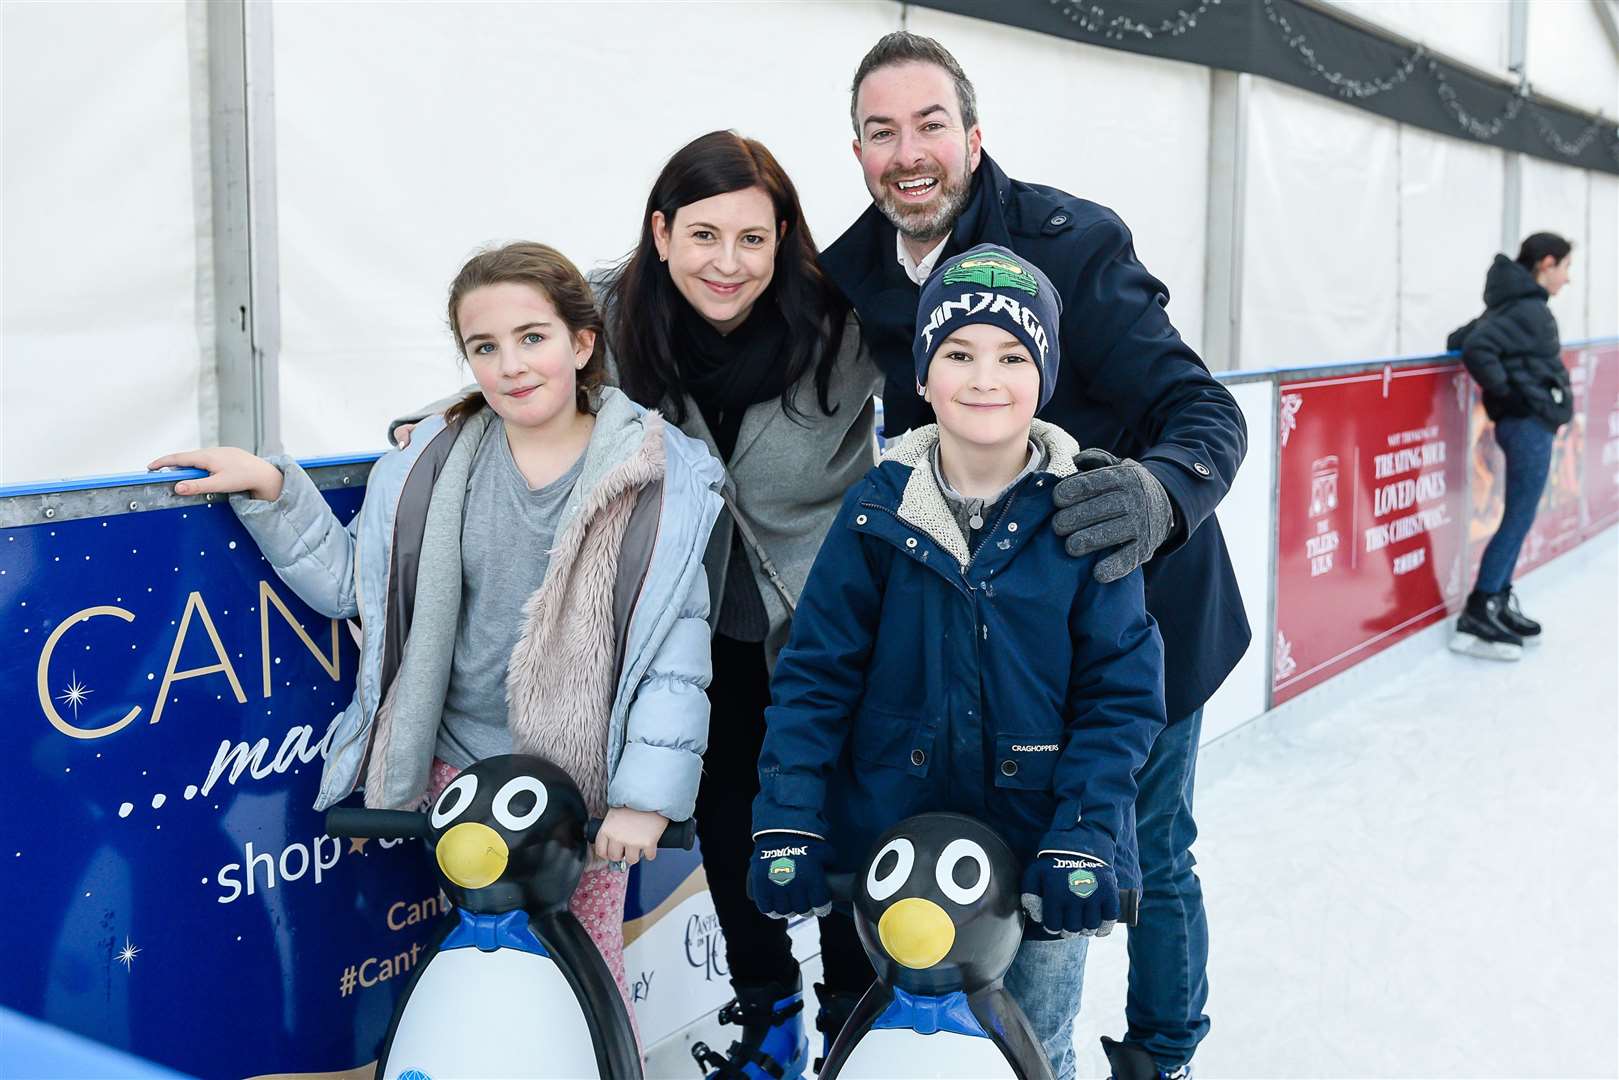 The Dunphy family from Tonbridge enjoyed skating back in December. The council says 25% of sales came from the family ticket offer